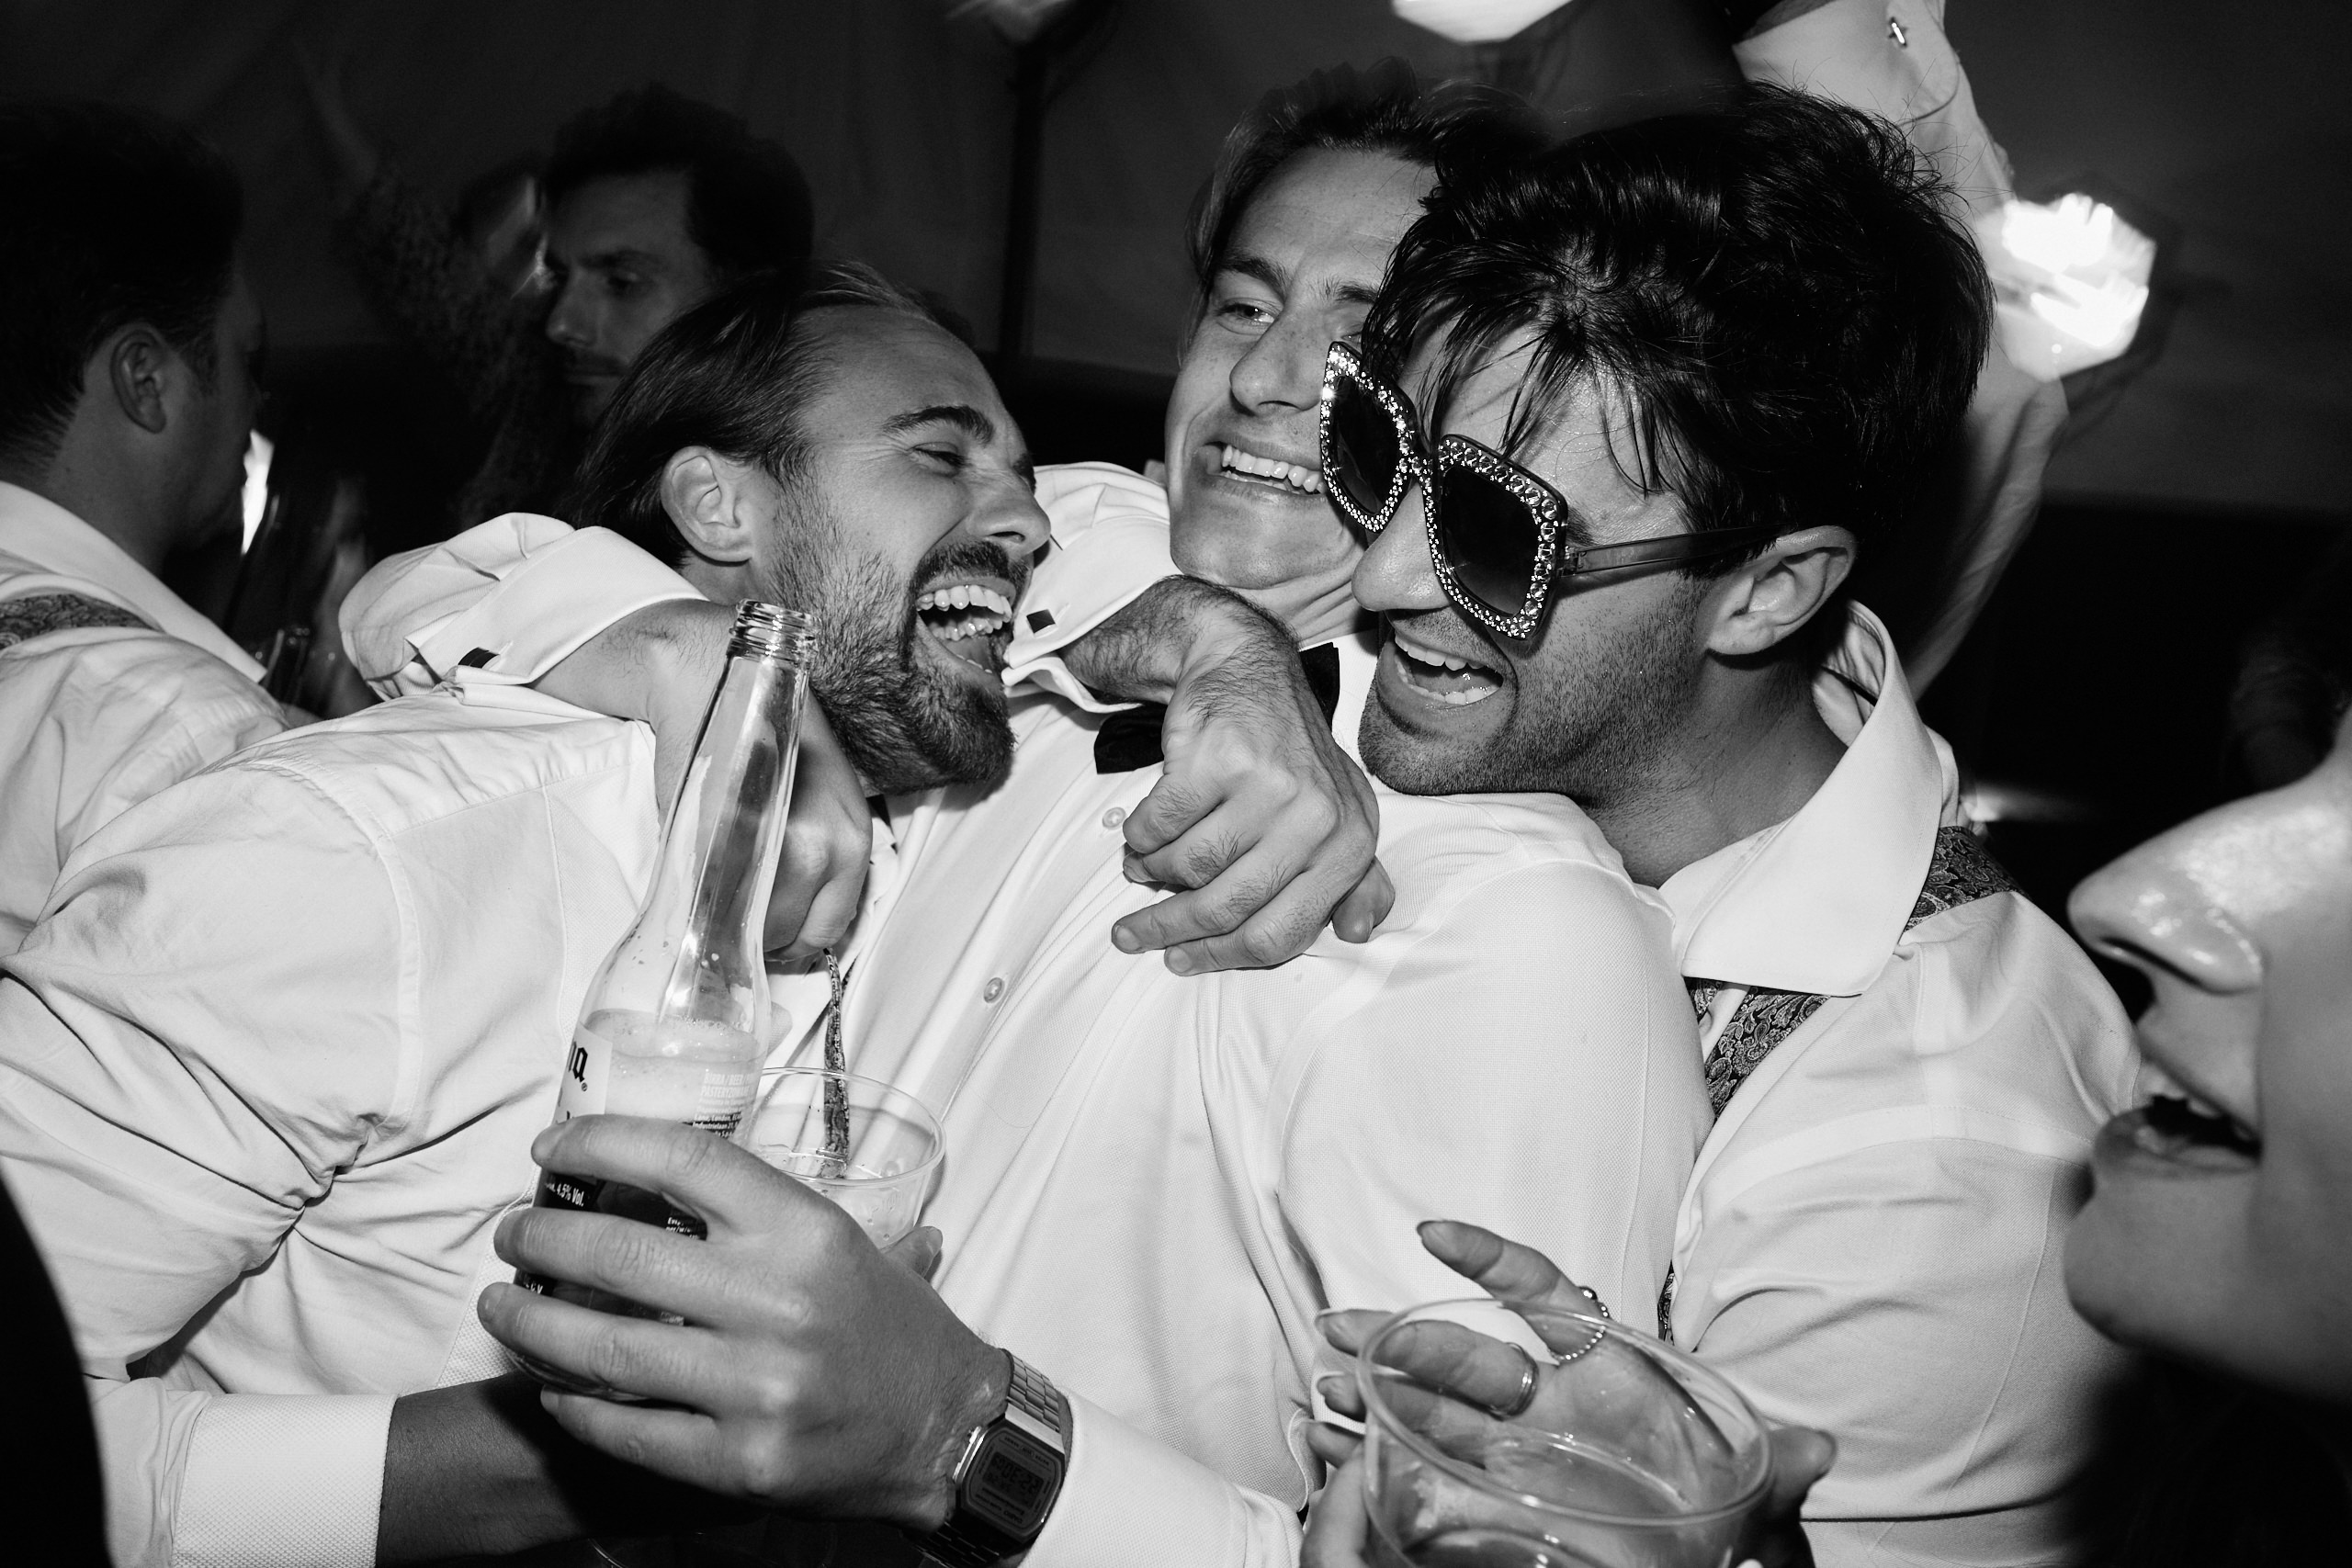 A picture in black and white showing a bunch of guys at a party.